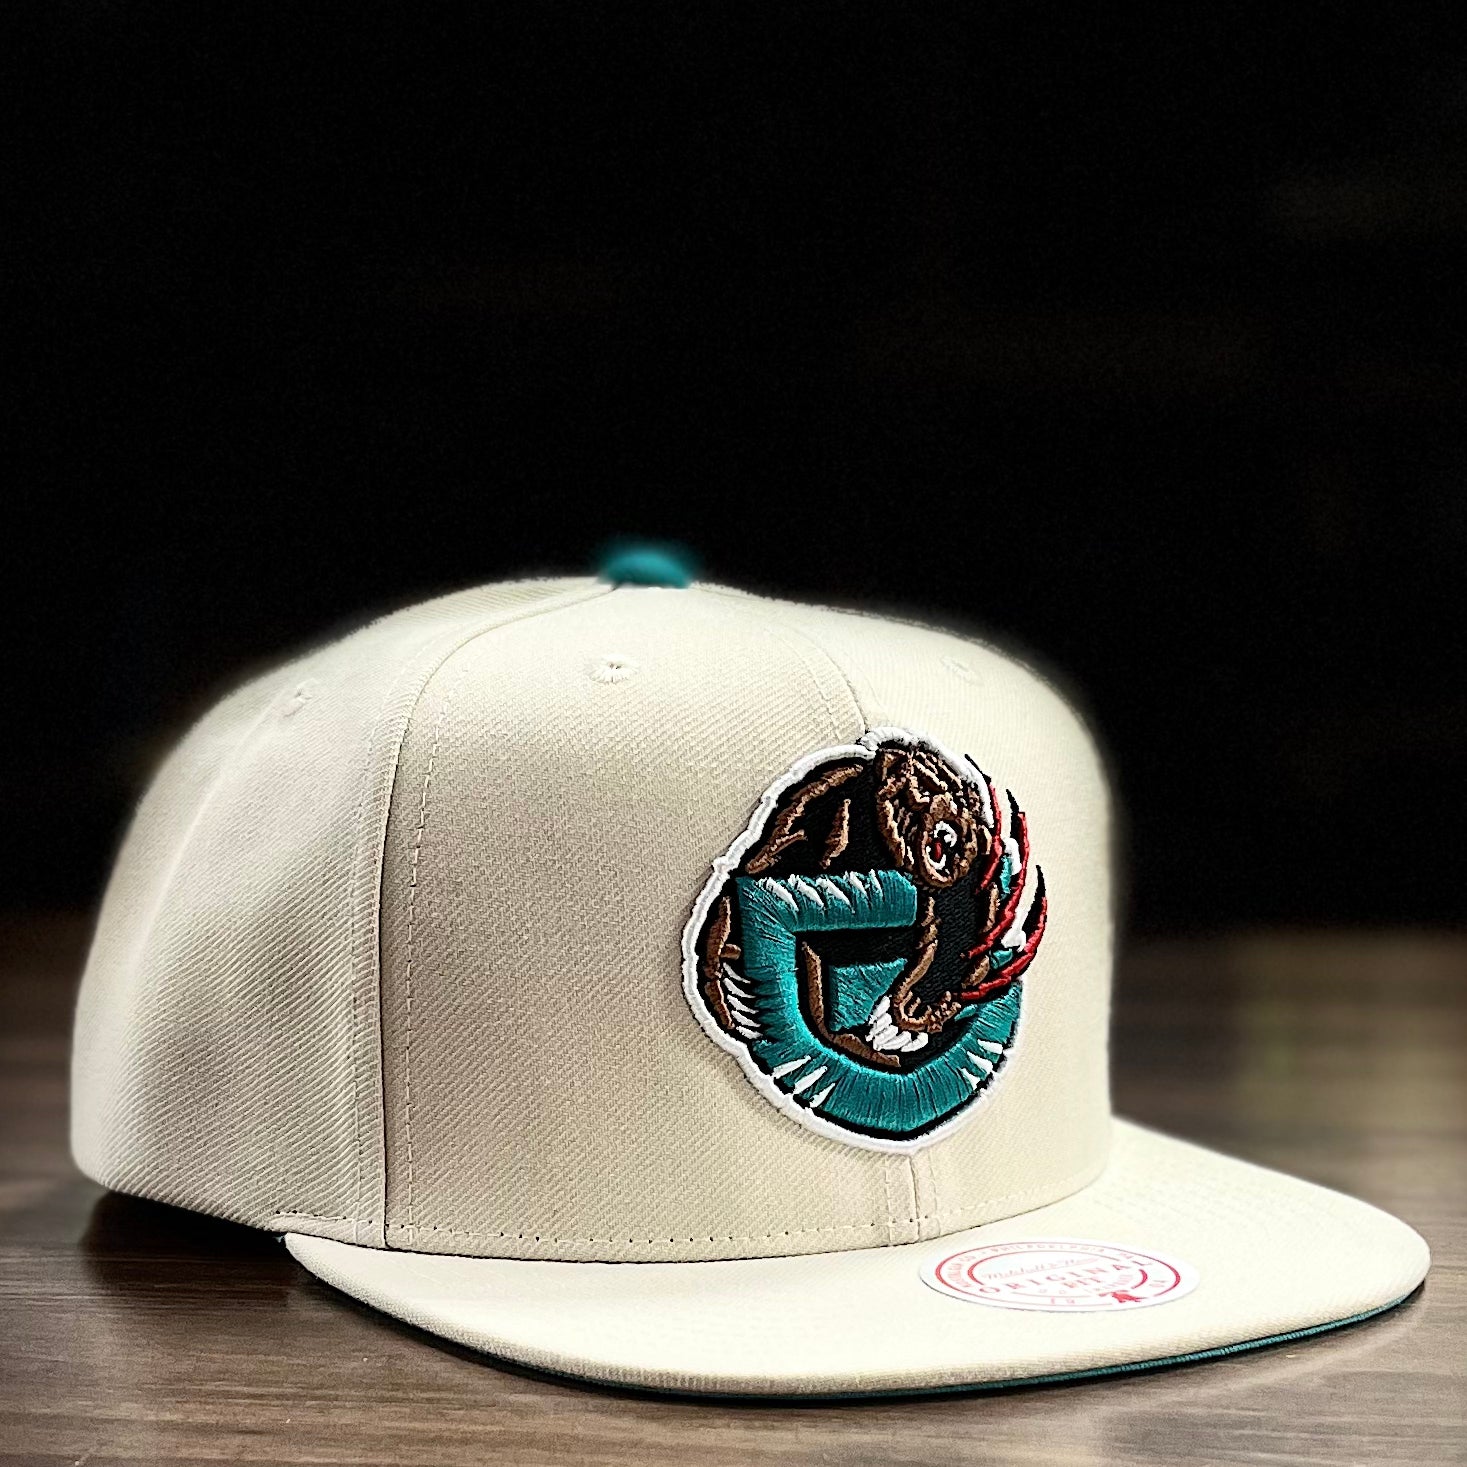 Mitchell & Ness Vancouver Grizzlies Off White HWC 2-Tone Snapback Hat, Cream